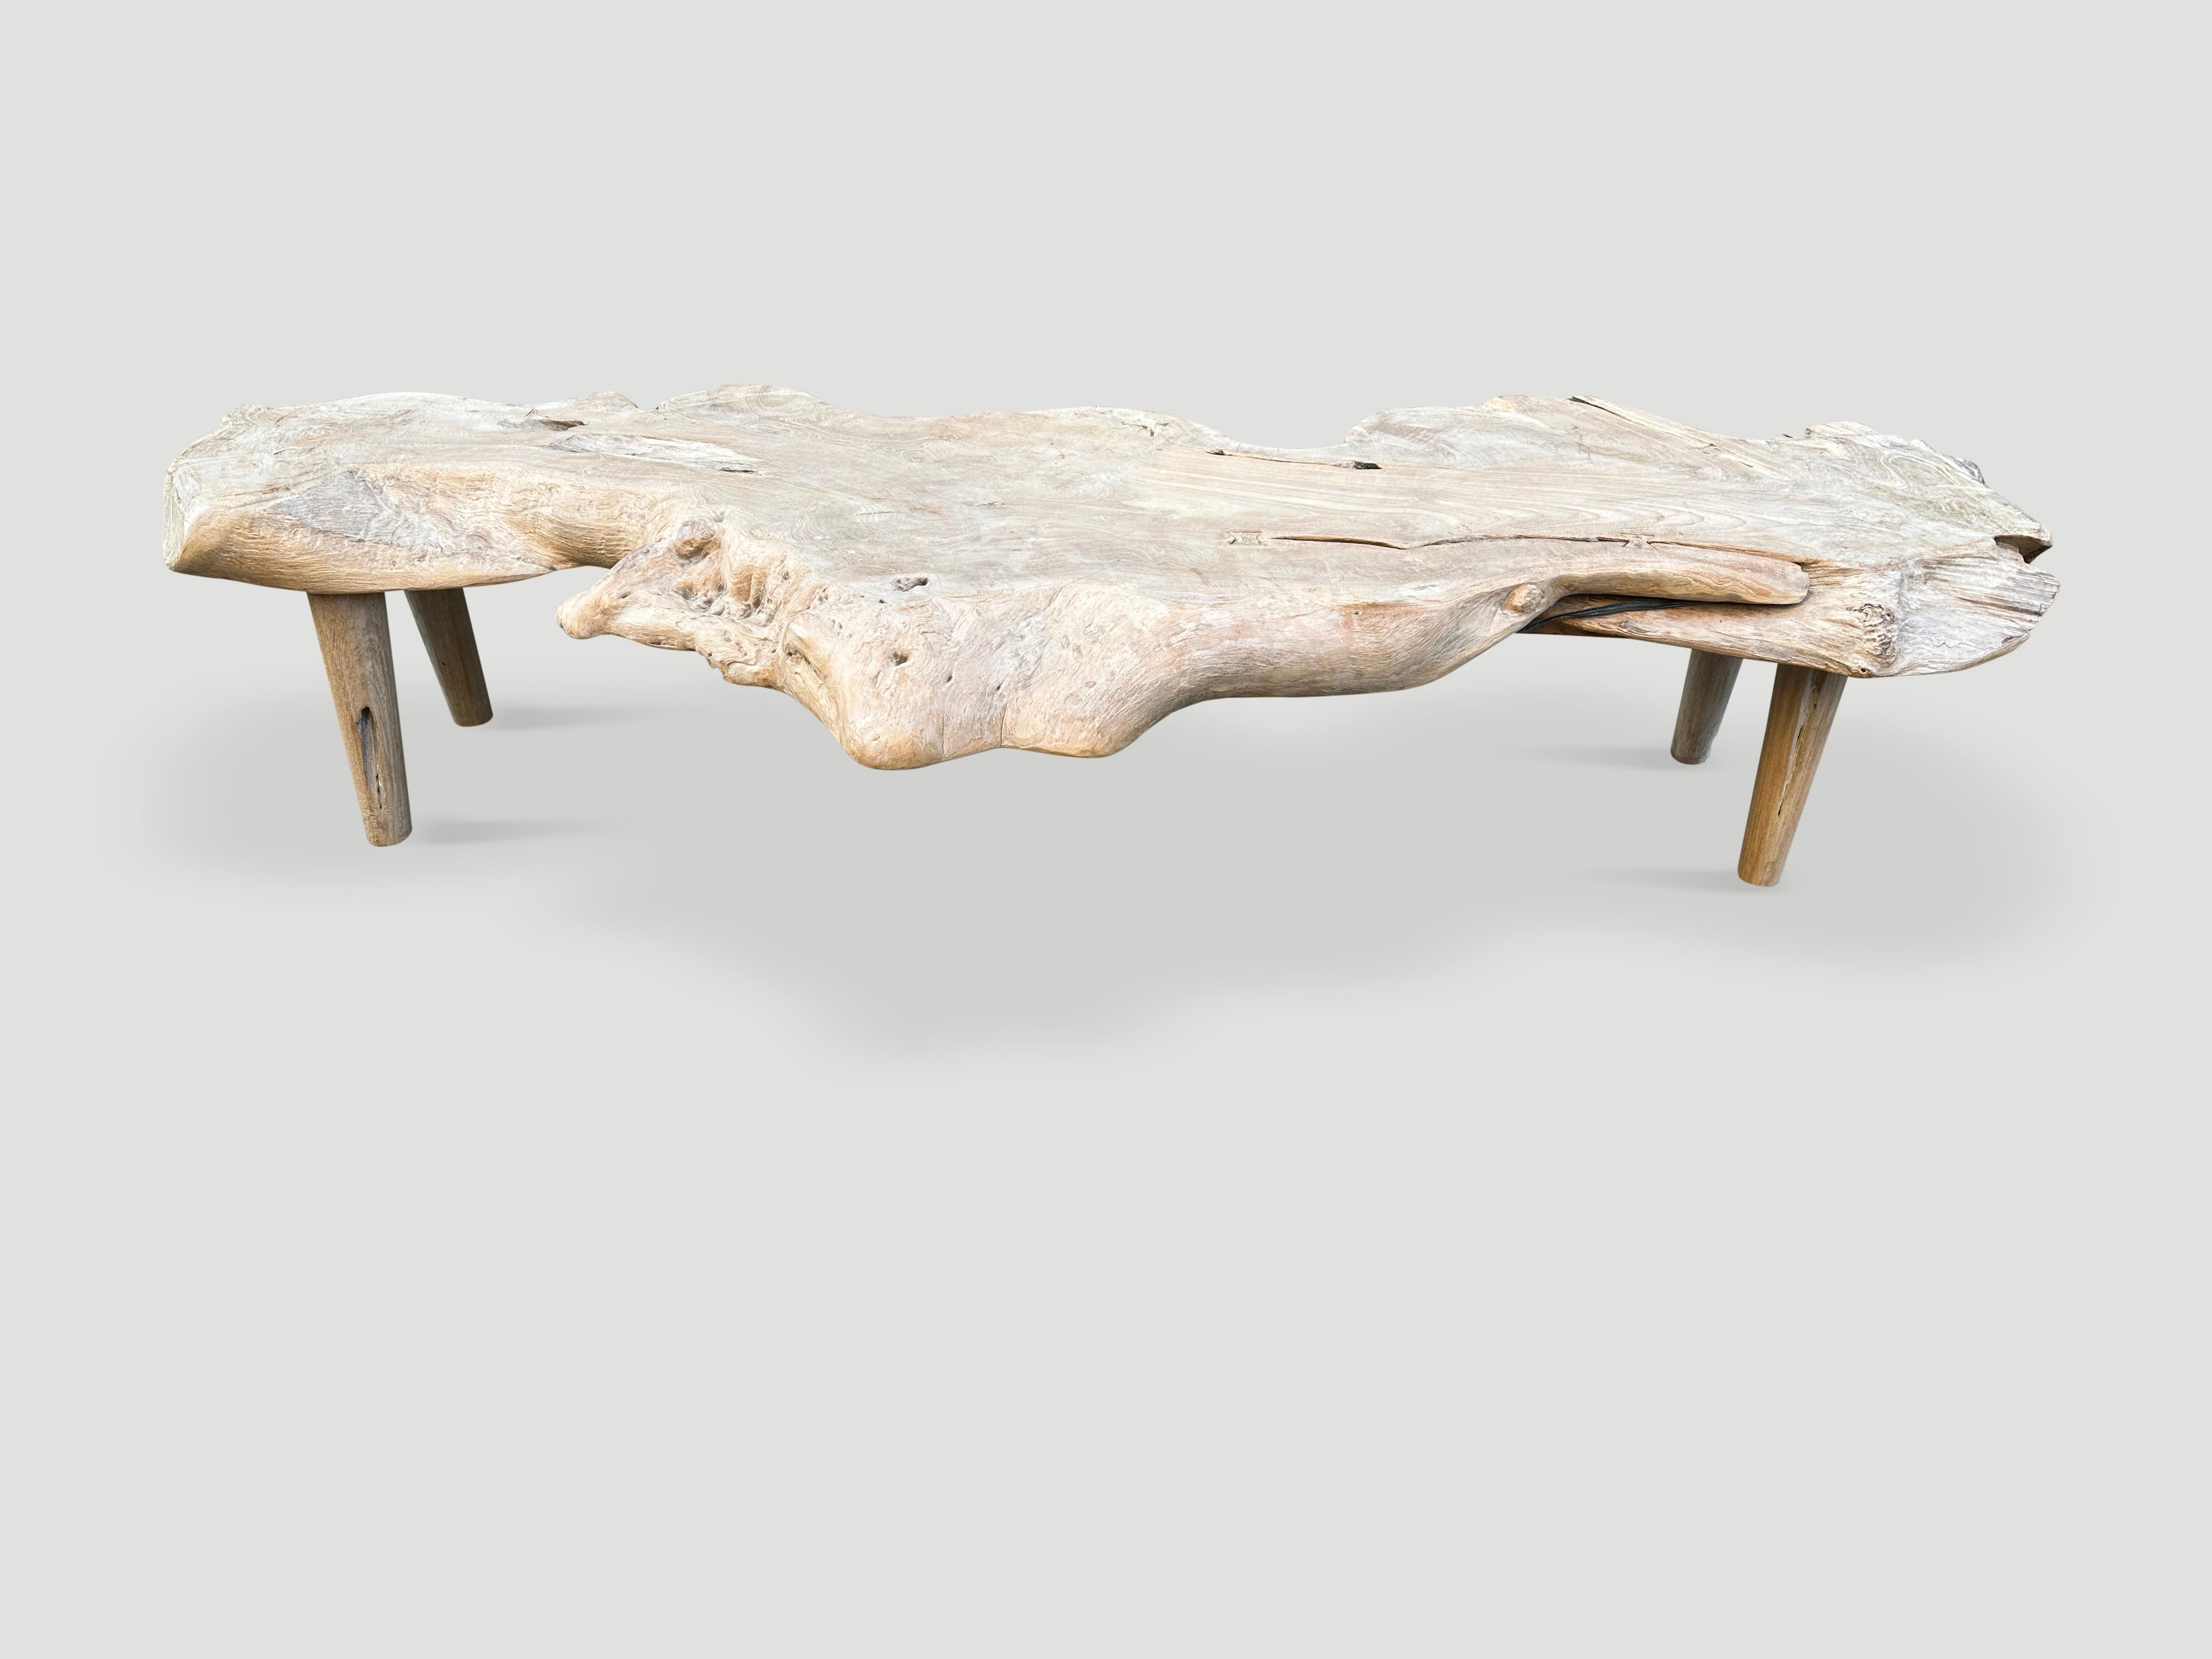 Andrianna Shamaris Sculptural Organic Teak Wood Coffee Table In Excellent Condition For Sale In New York, NY